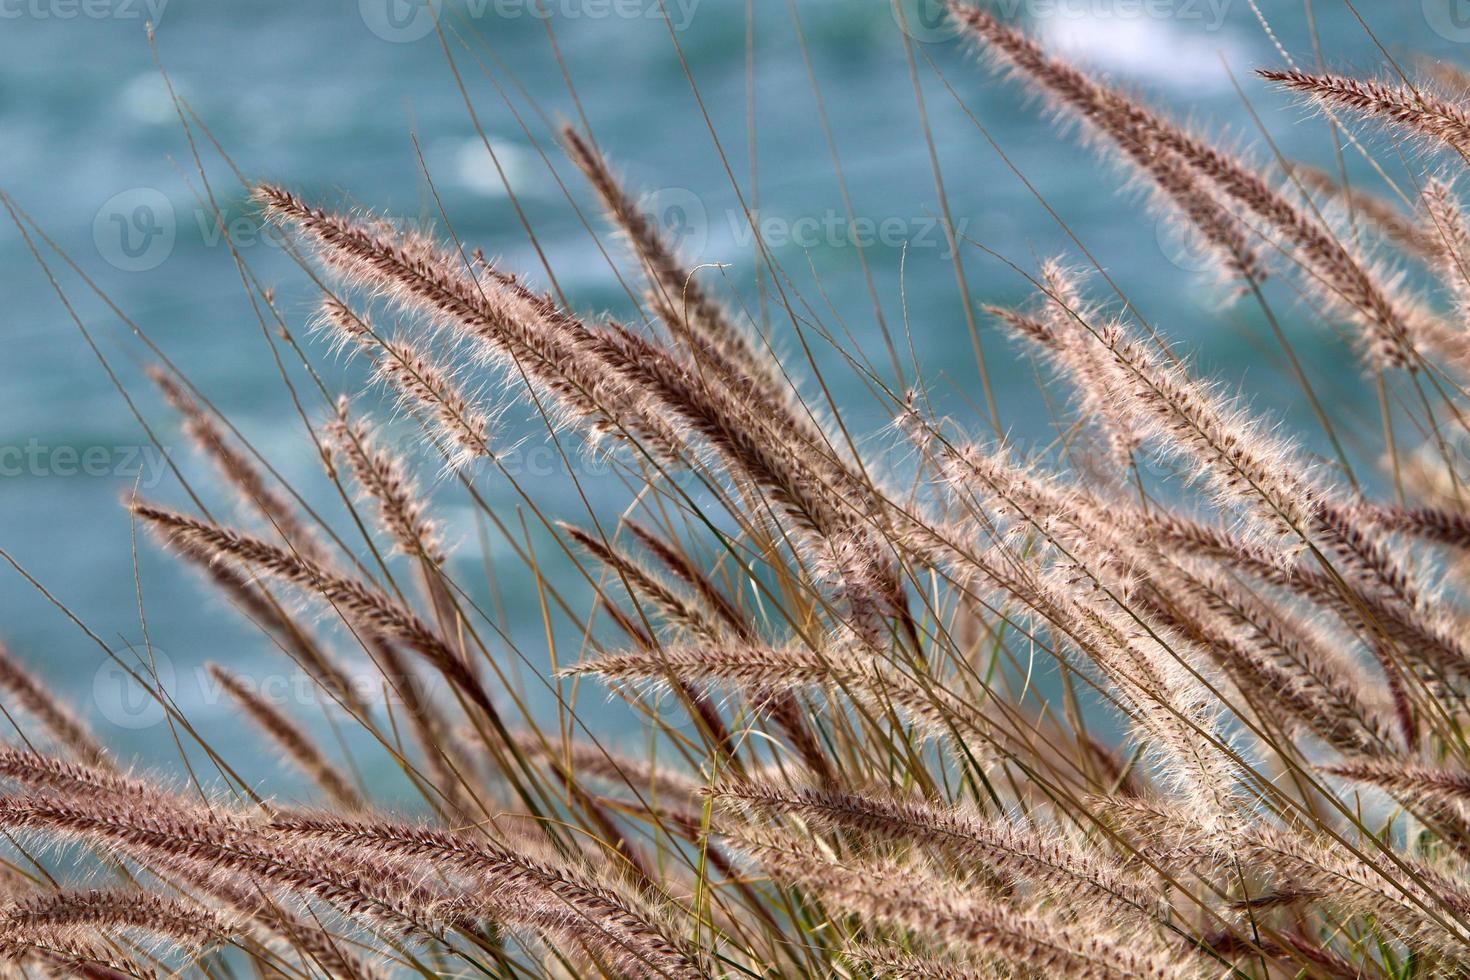 Field spikelets natural dried flowers 80 centimeters high. photo